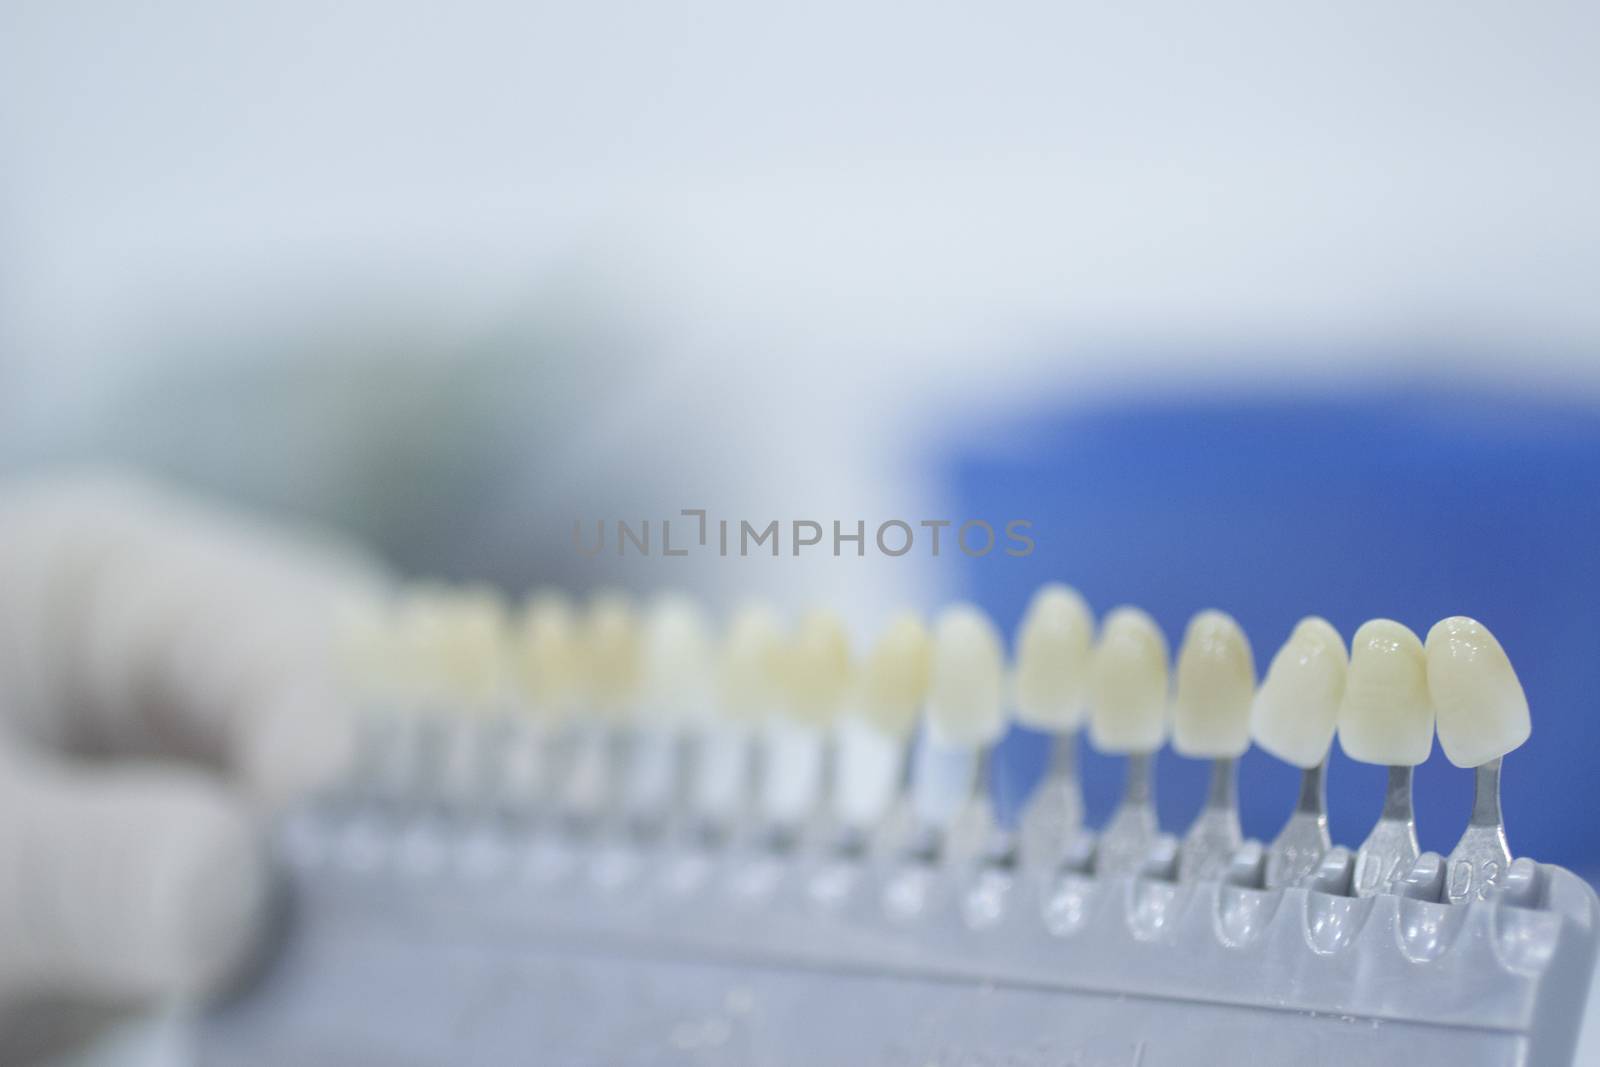 Dental nurse holding implant and crown tooth color guide by edwardolive